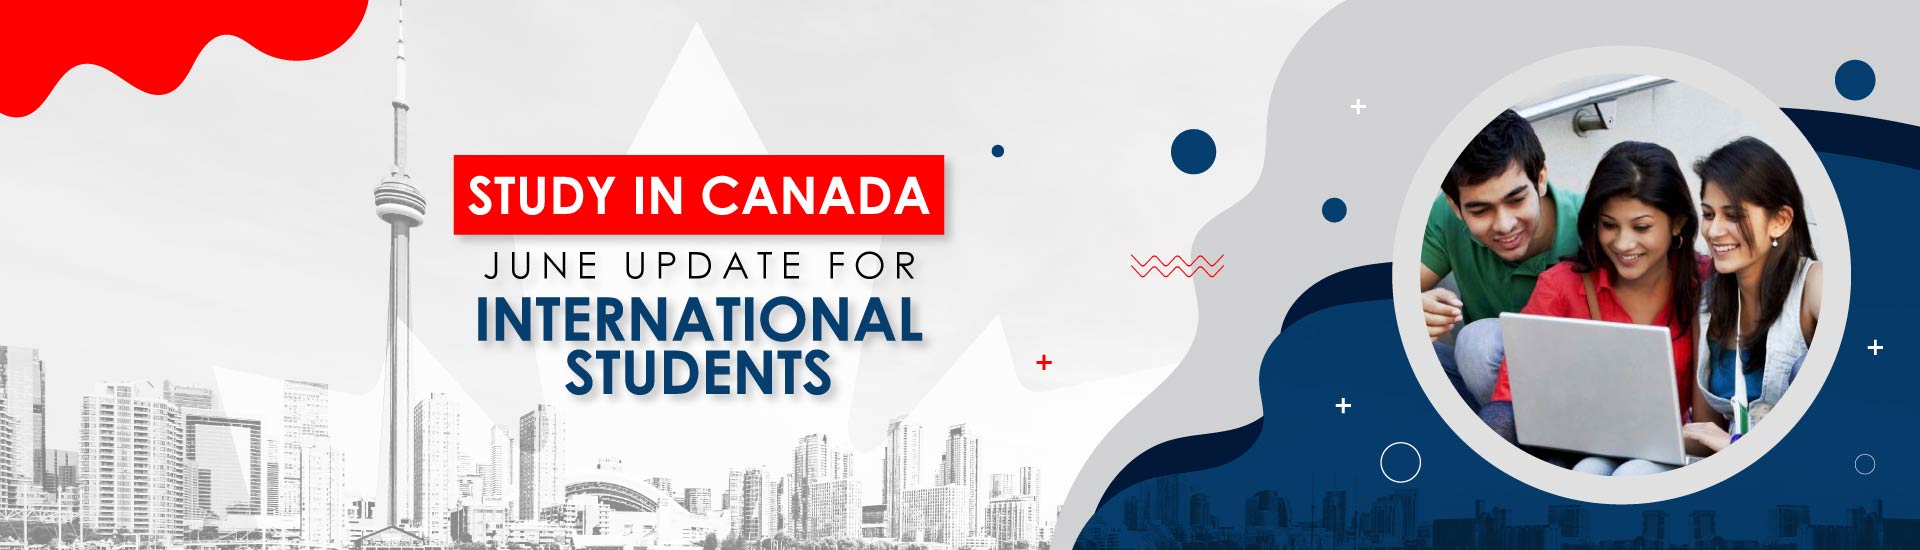 Study in Canada: June update for International Students